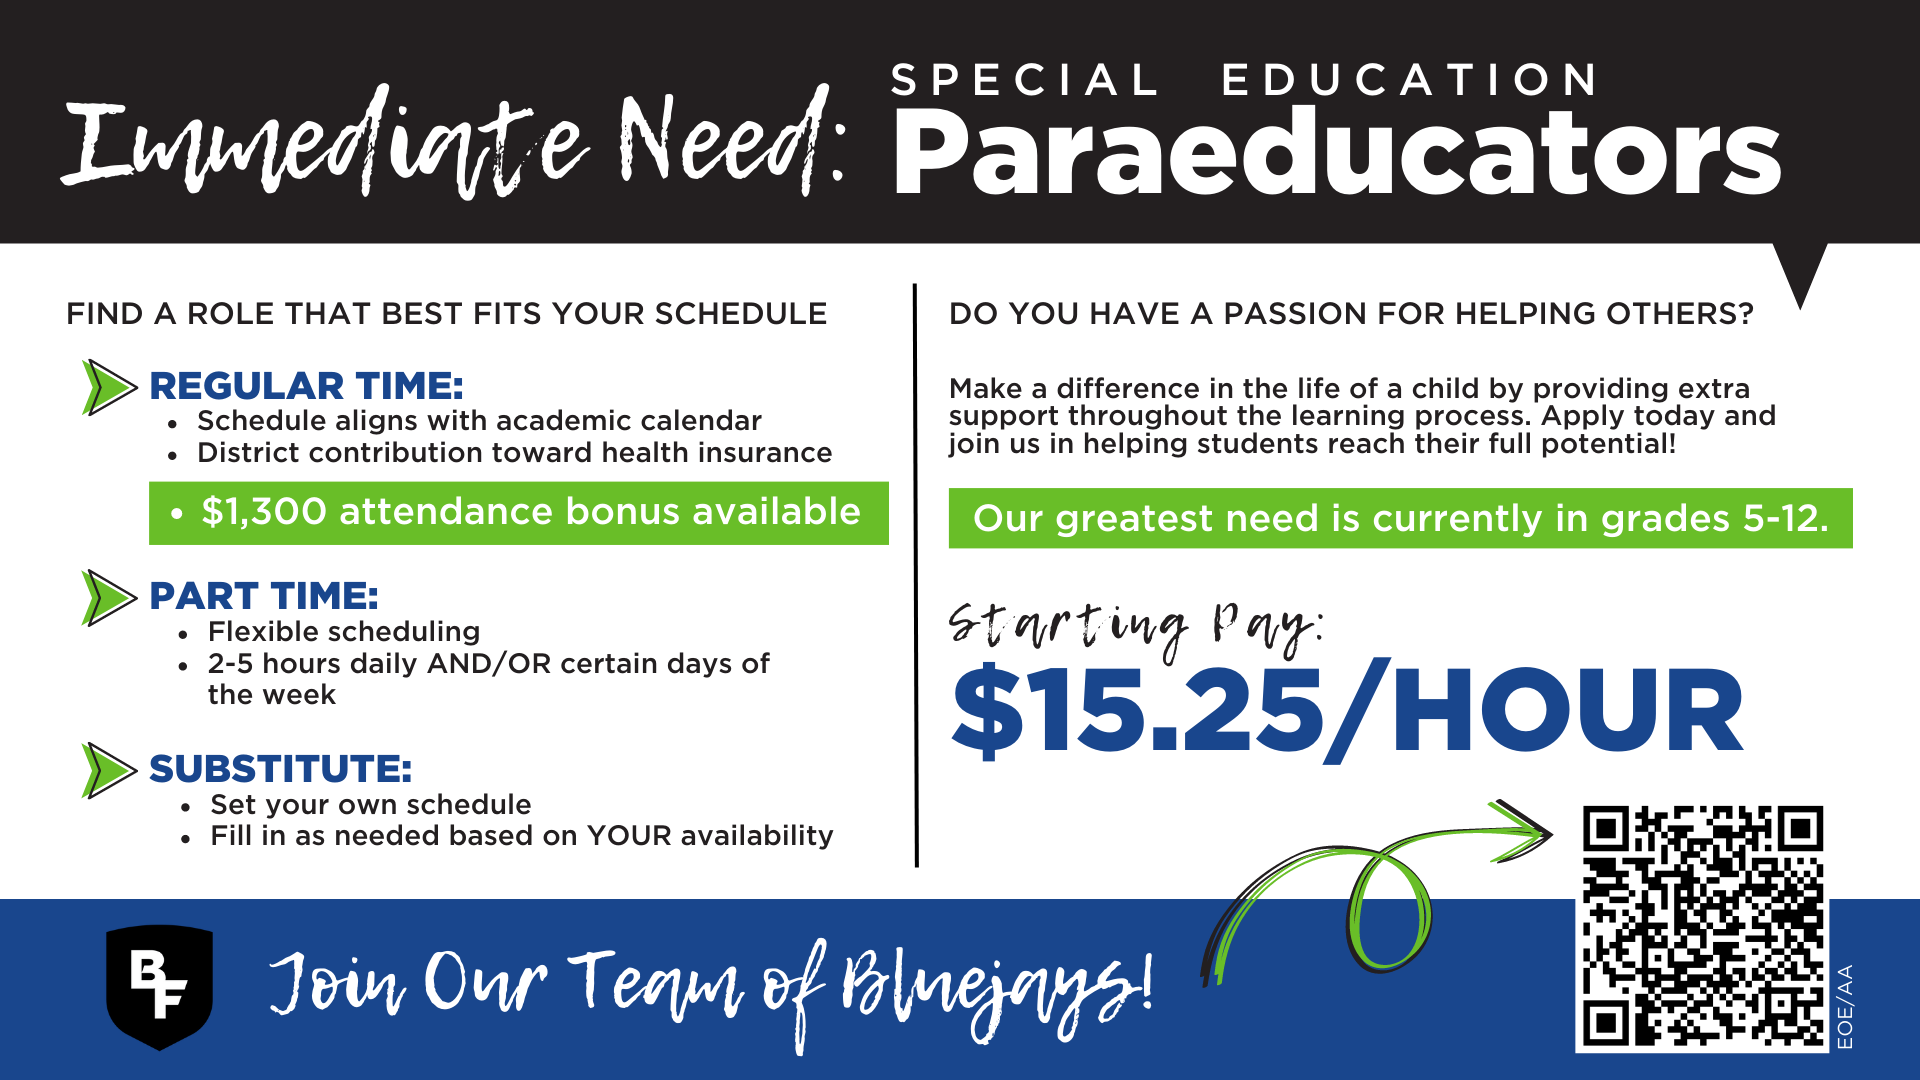 Immediate need for special education paraeducators, apply today to join our team